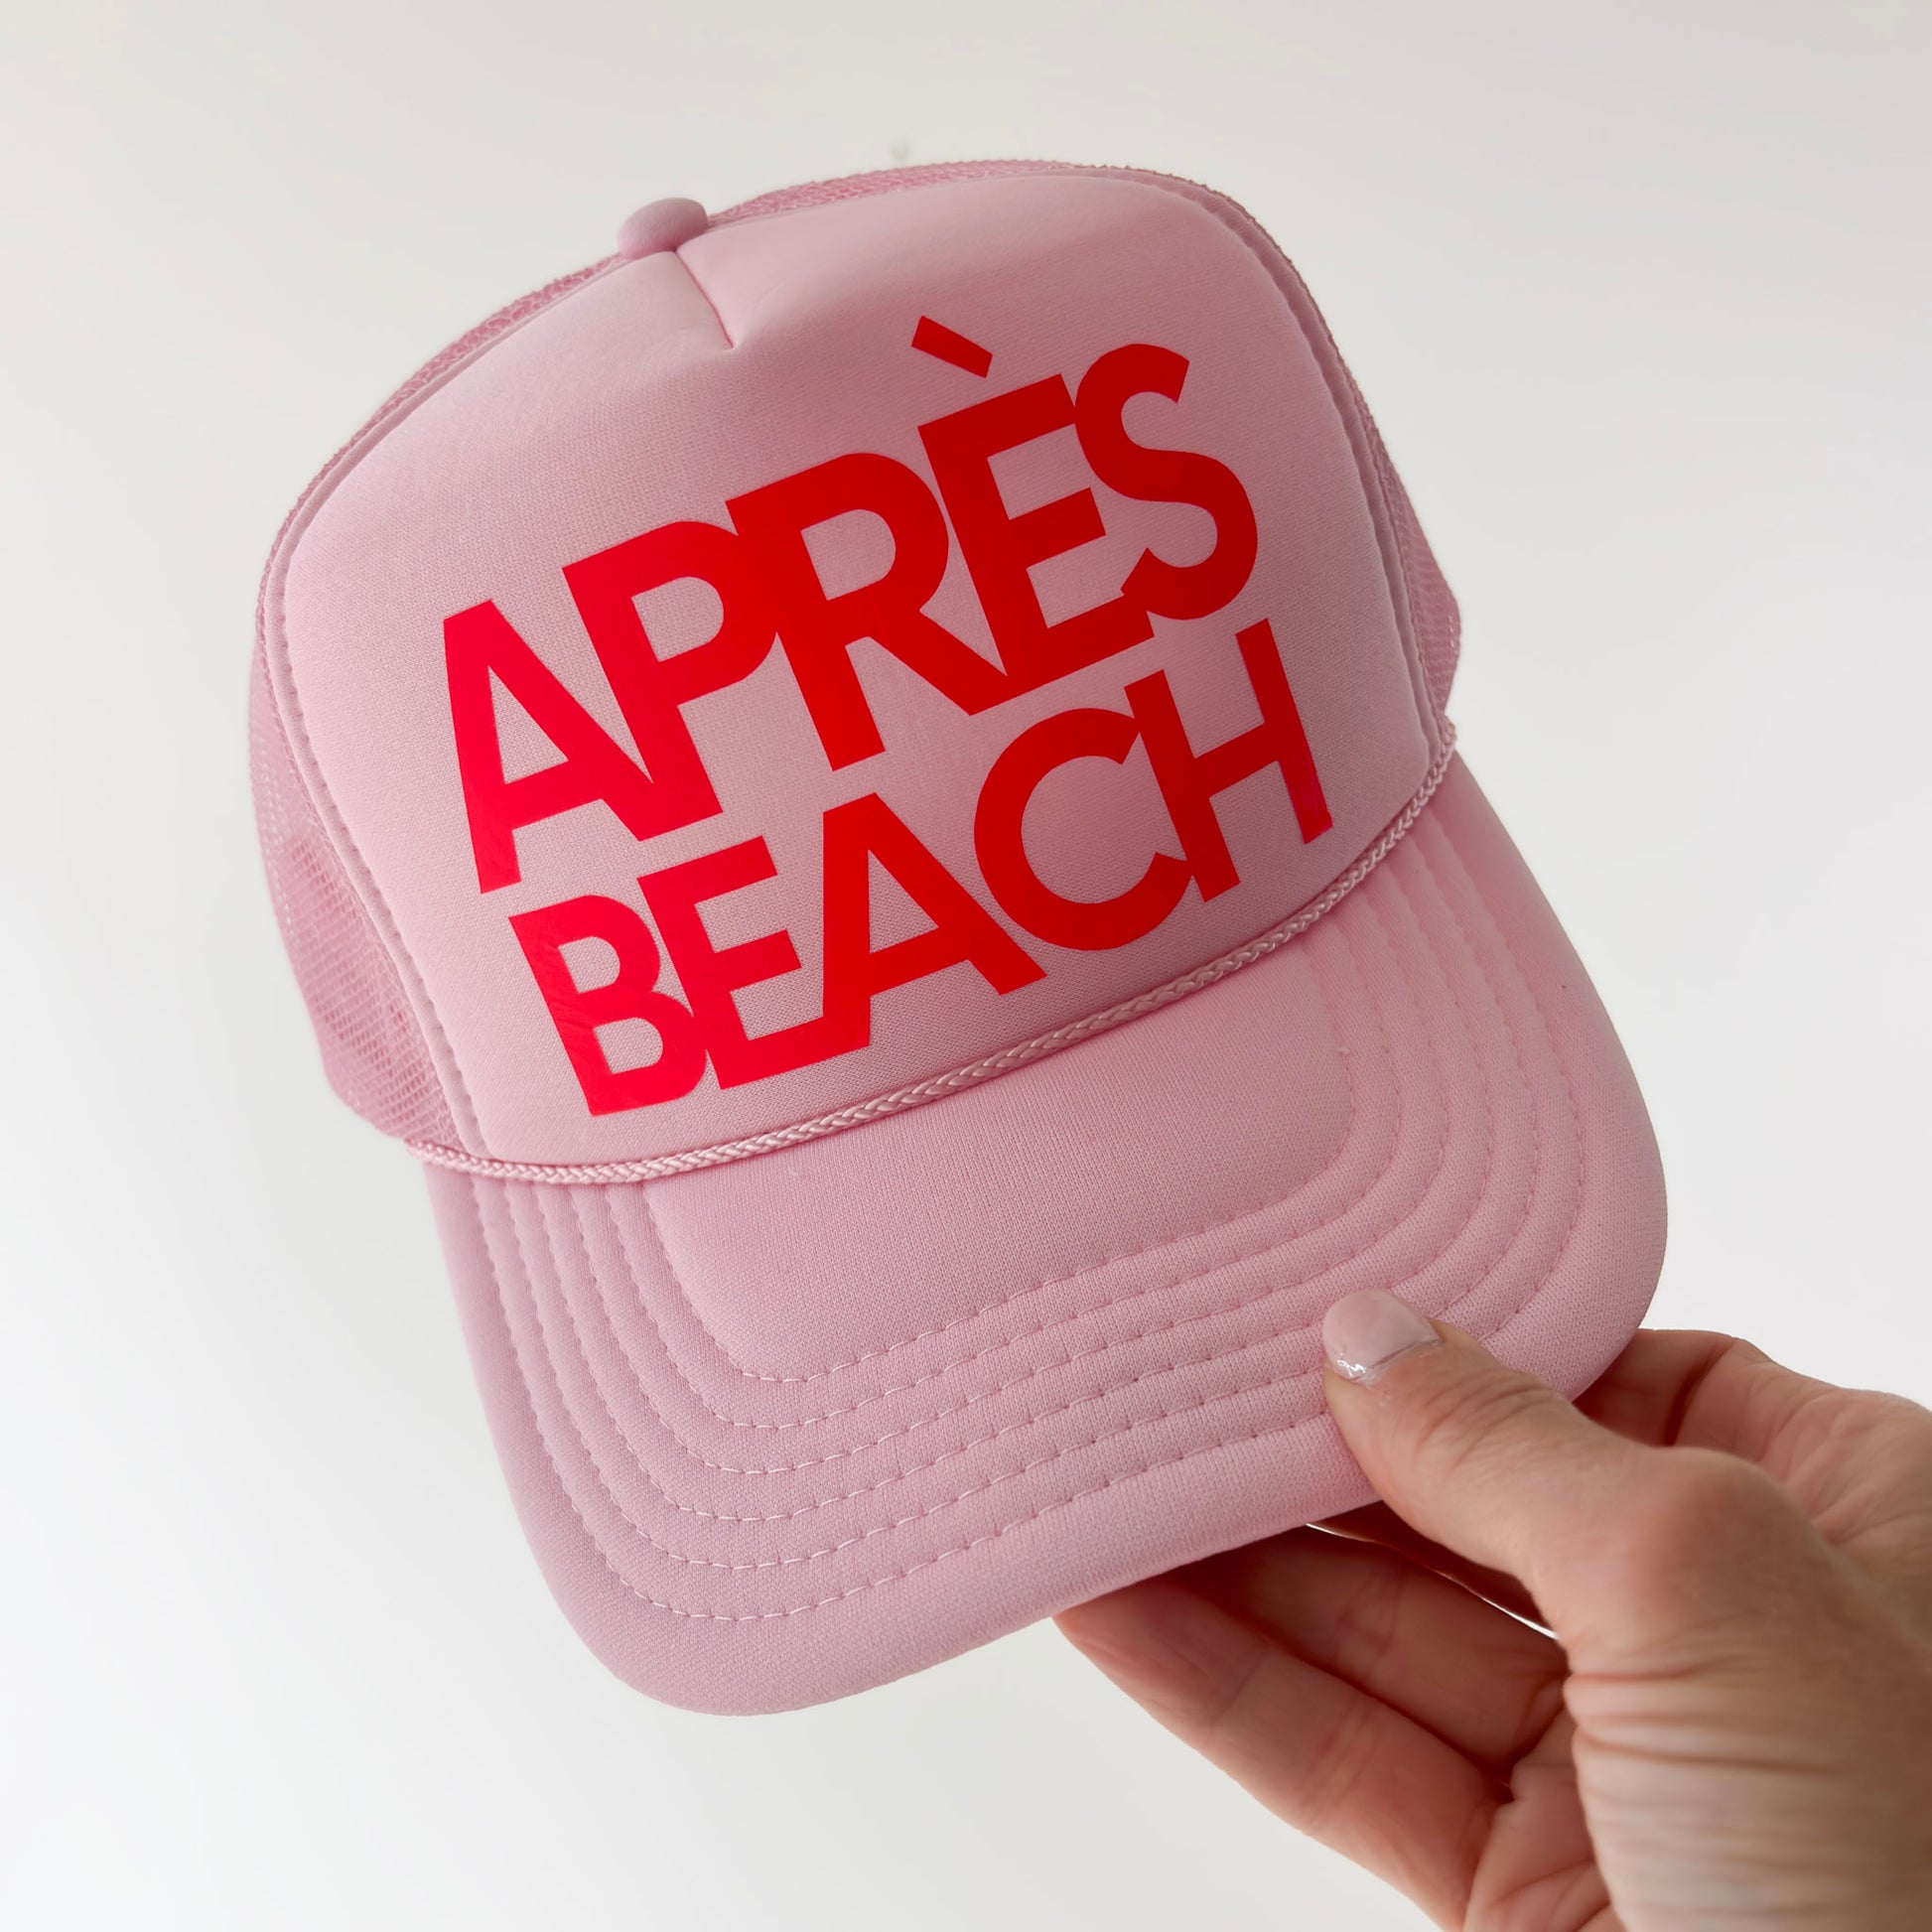 Women's light pink high profile trucker hat with neon coral après beach print